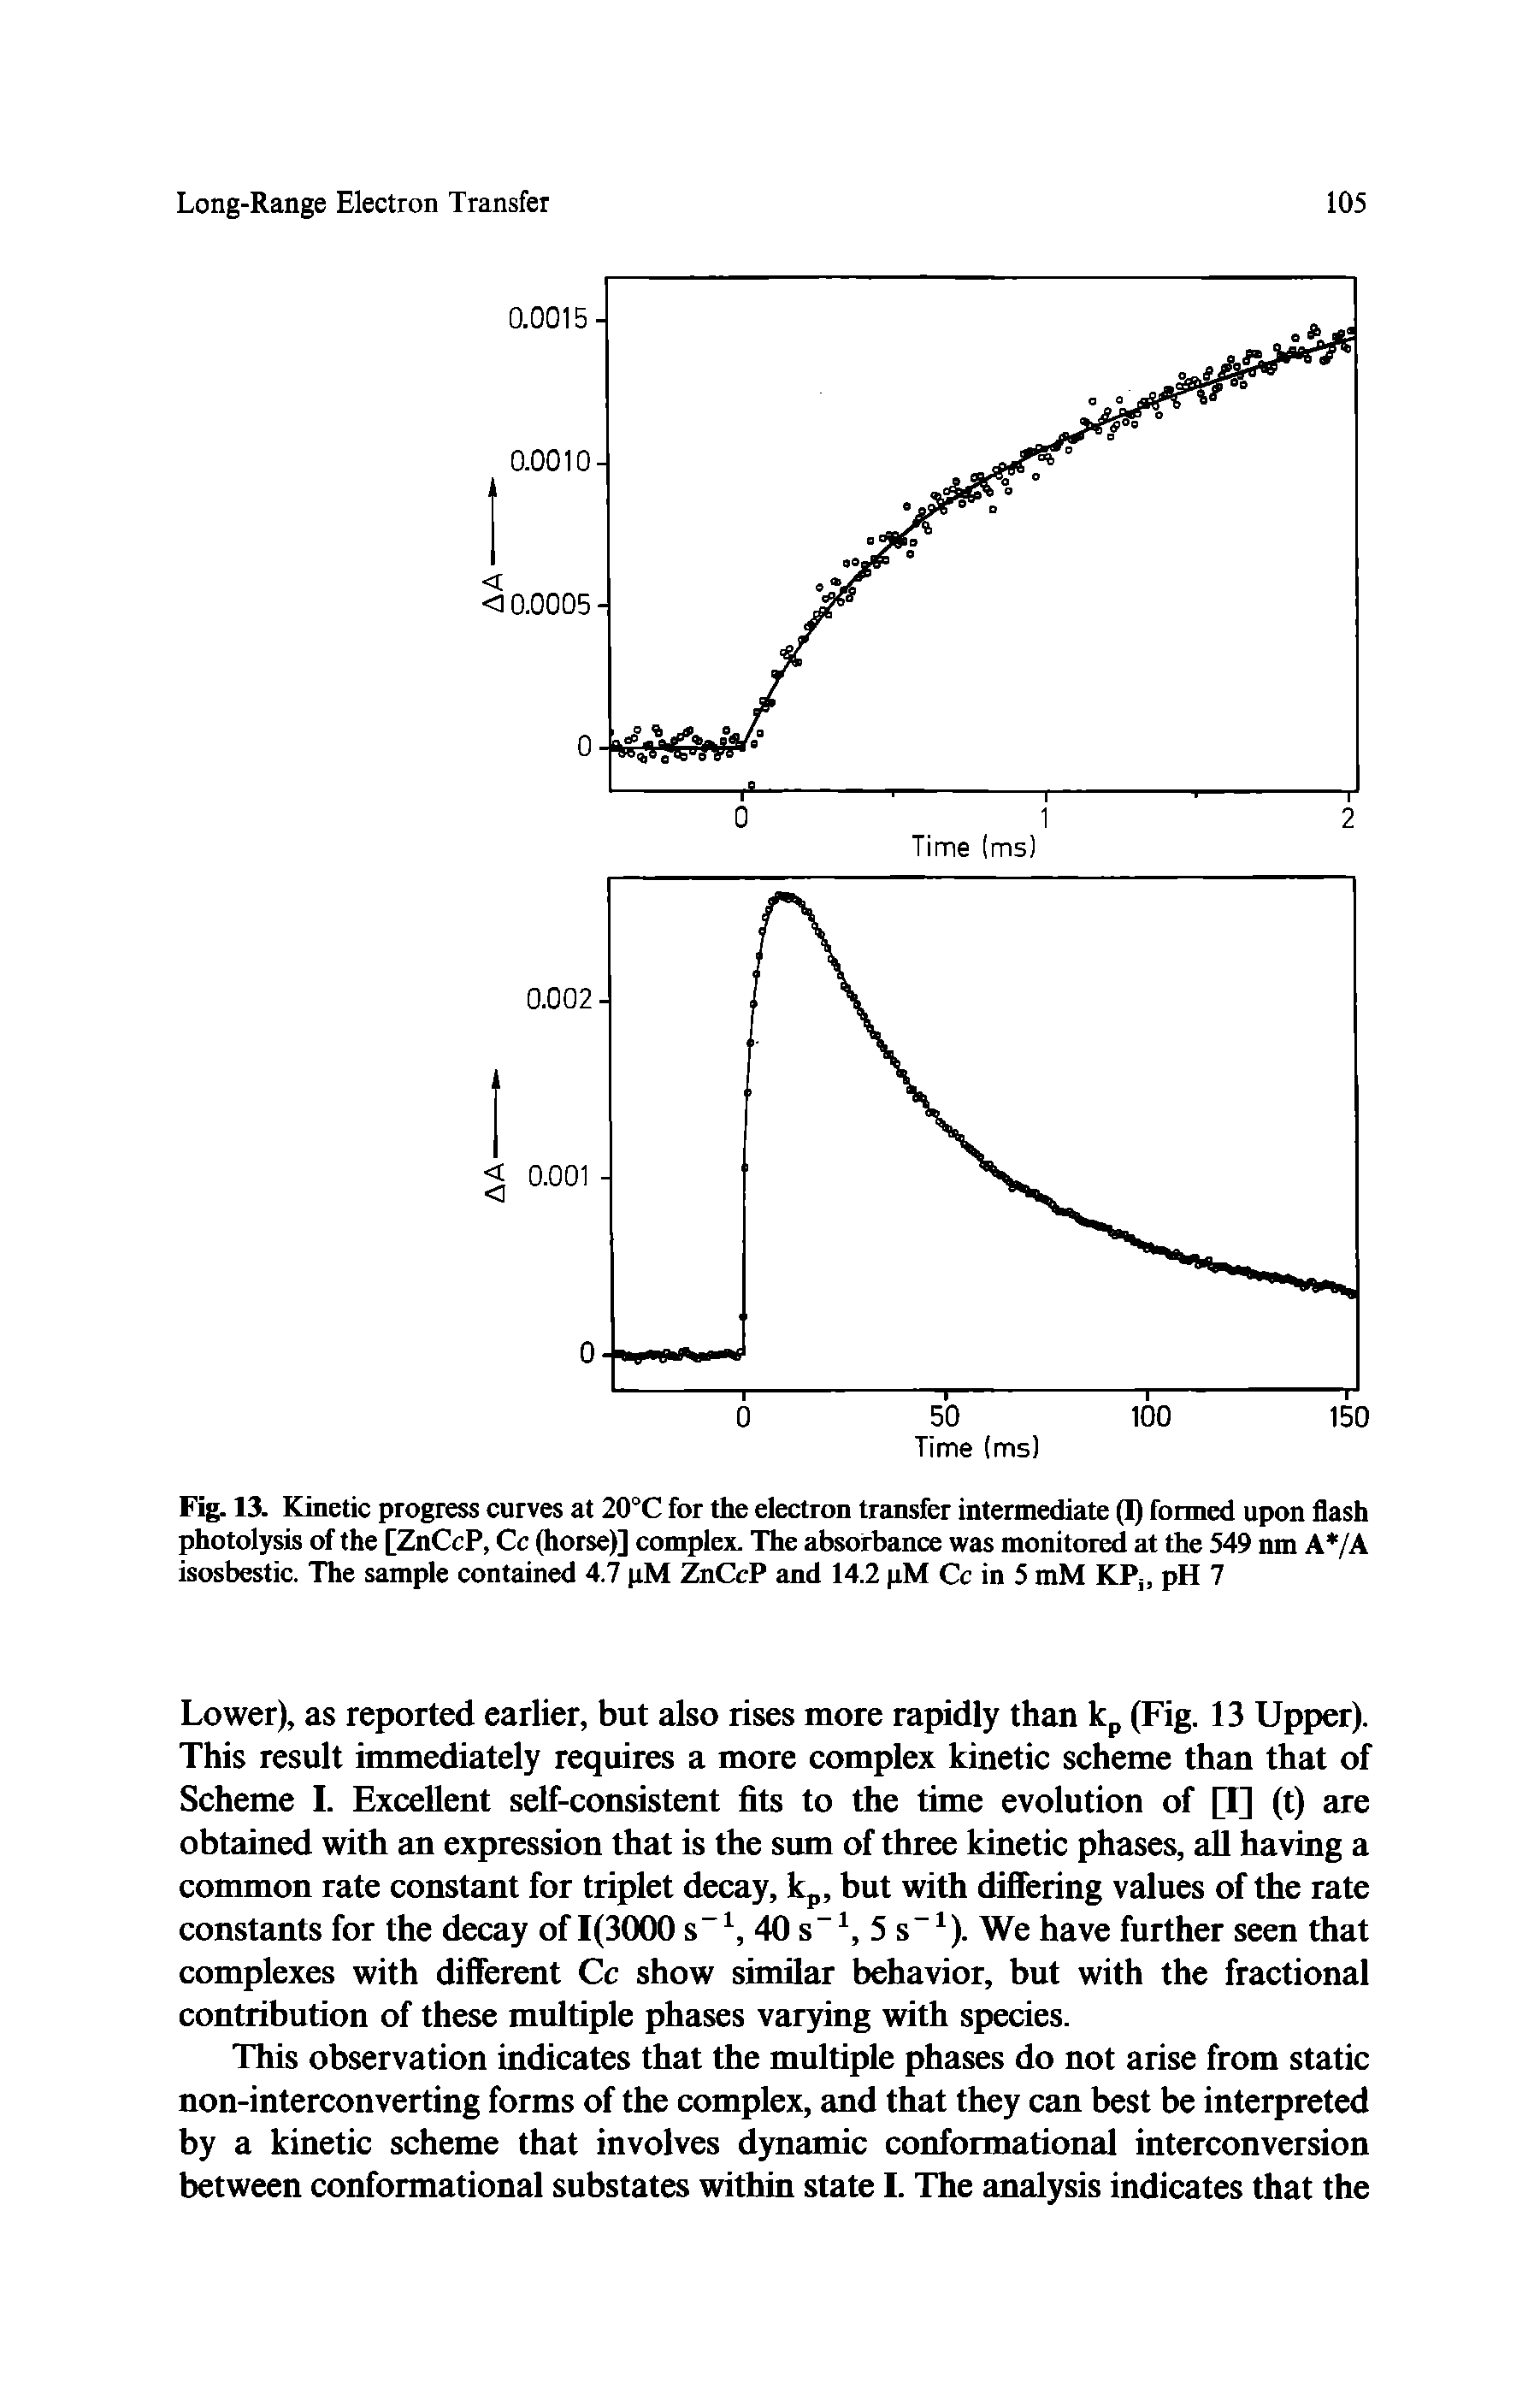 Fig. 13. Kinetic progress curves at 20°C for the electron transfer intermediate (I) formed upon flash photolysis of the [ZnCcP, Cc (horse)] complex. The absorbance was monitored at the 549 nm A /A isosbestic. The sample contained 4.7 pM ZnCcP and 14.2 pM Cc in 5 mM KPj, pH 7...